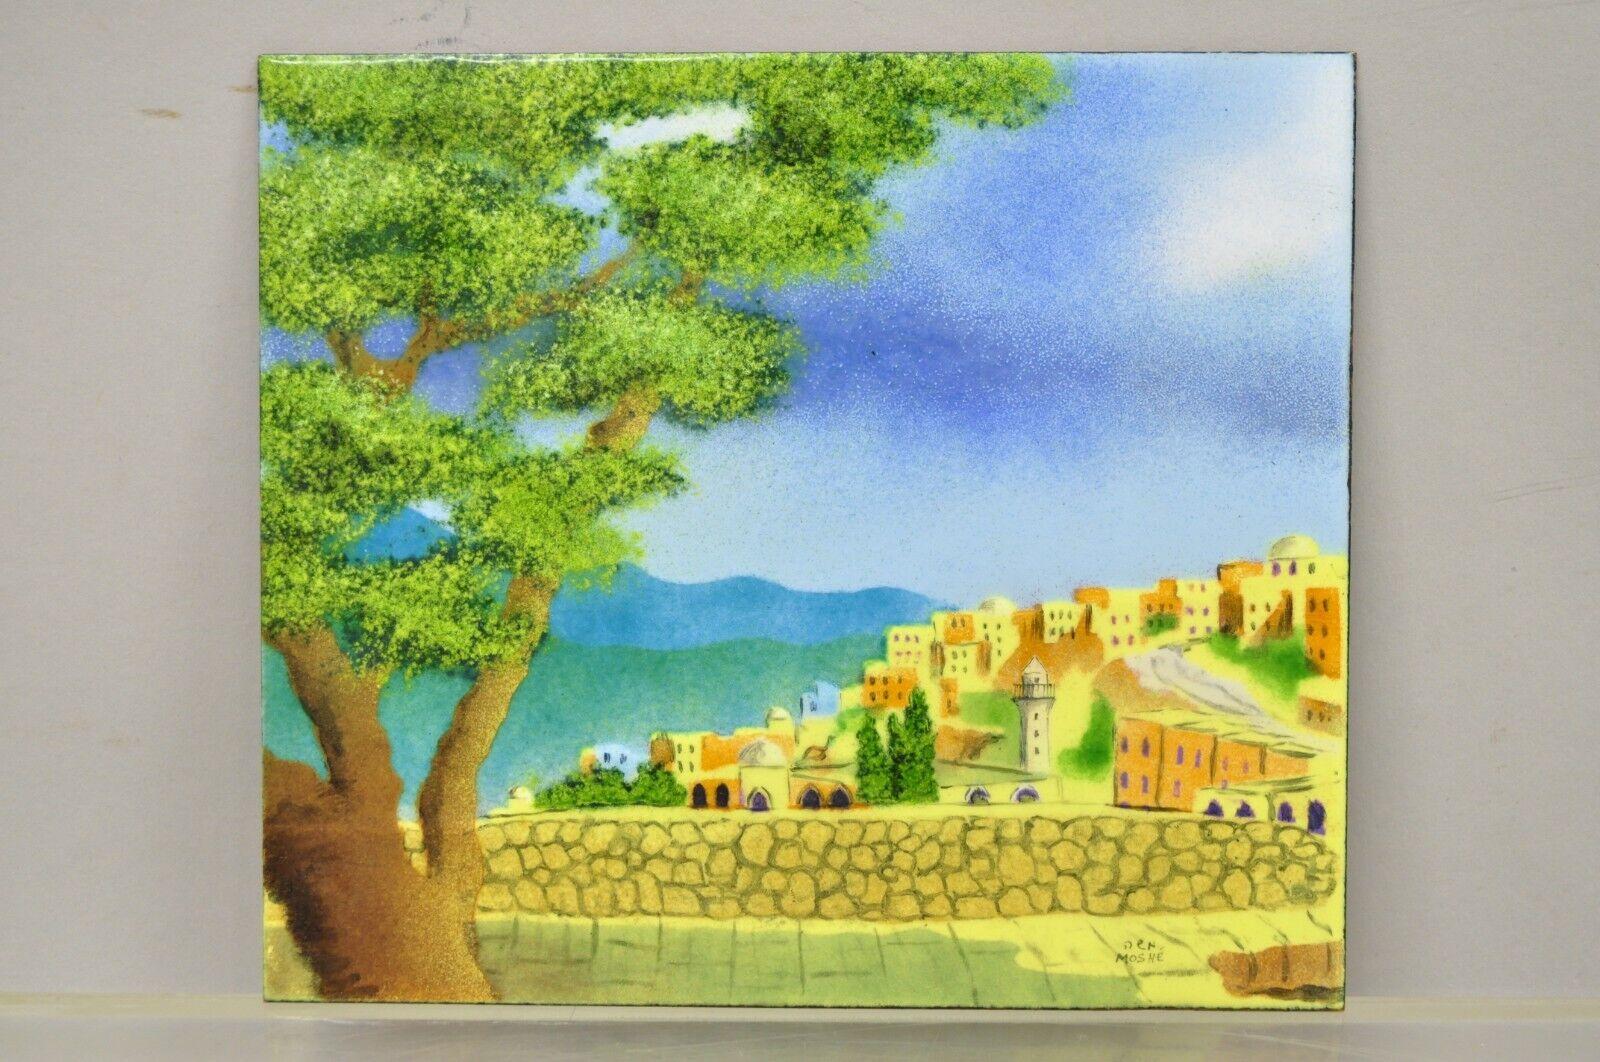 Den Moshe Signed Enamel on Copper Small Painting Yellow Countryside Art For Sale 5